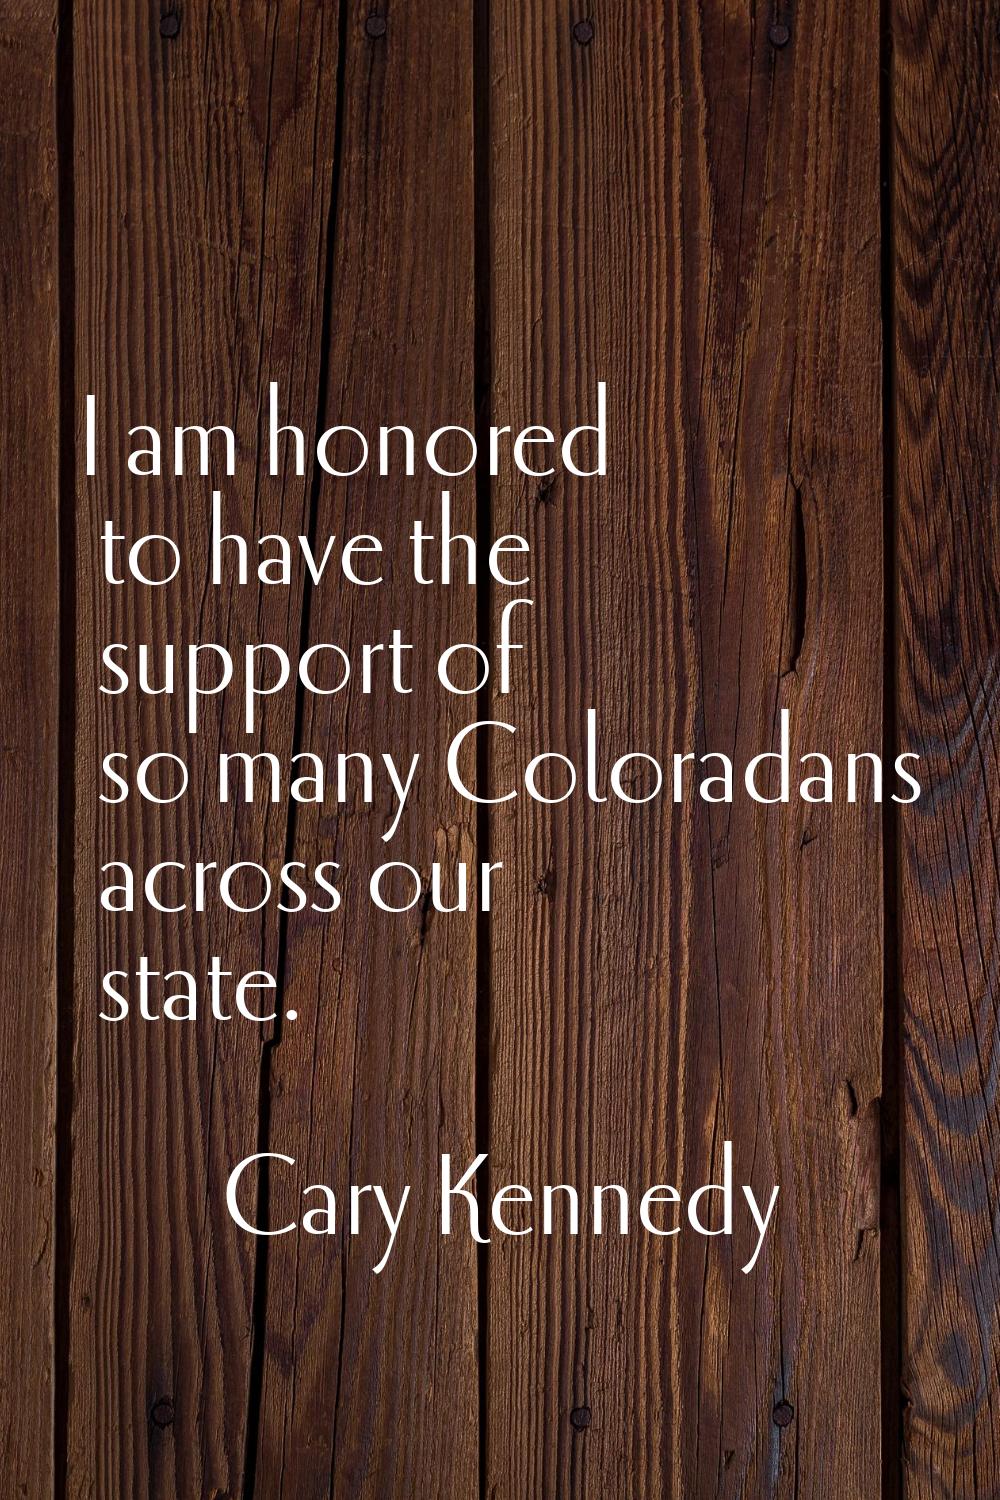 I am honored to have the support of so many Coloradans across our state.